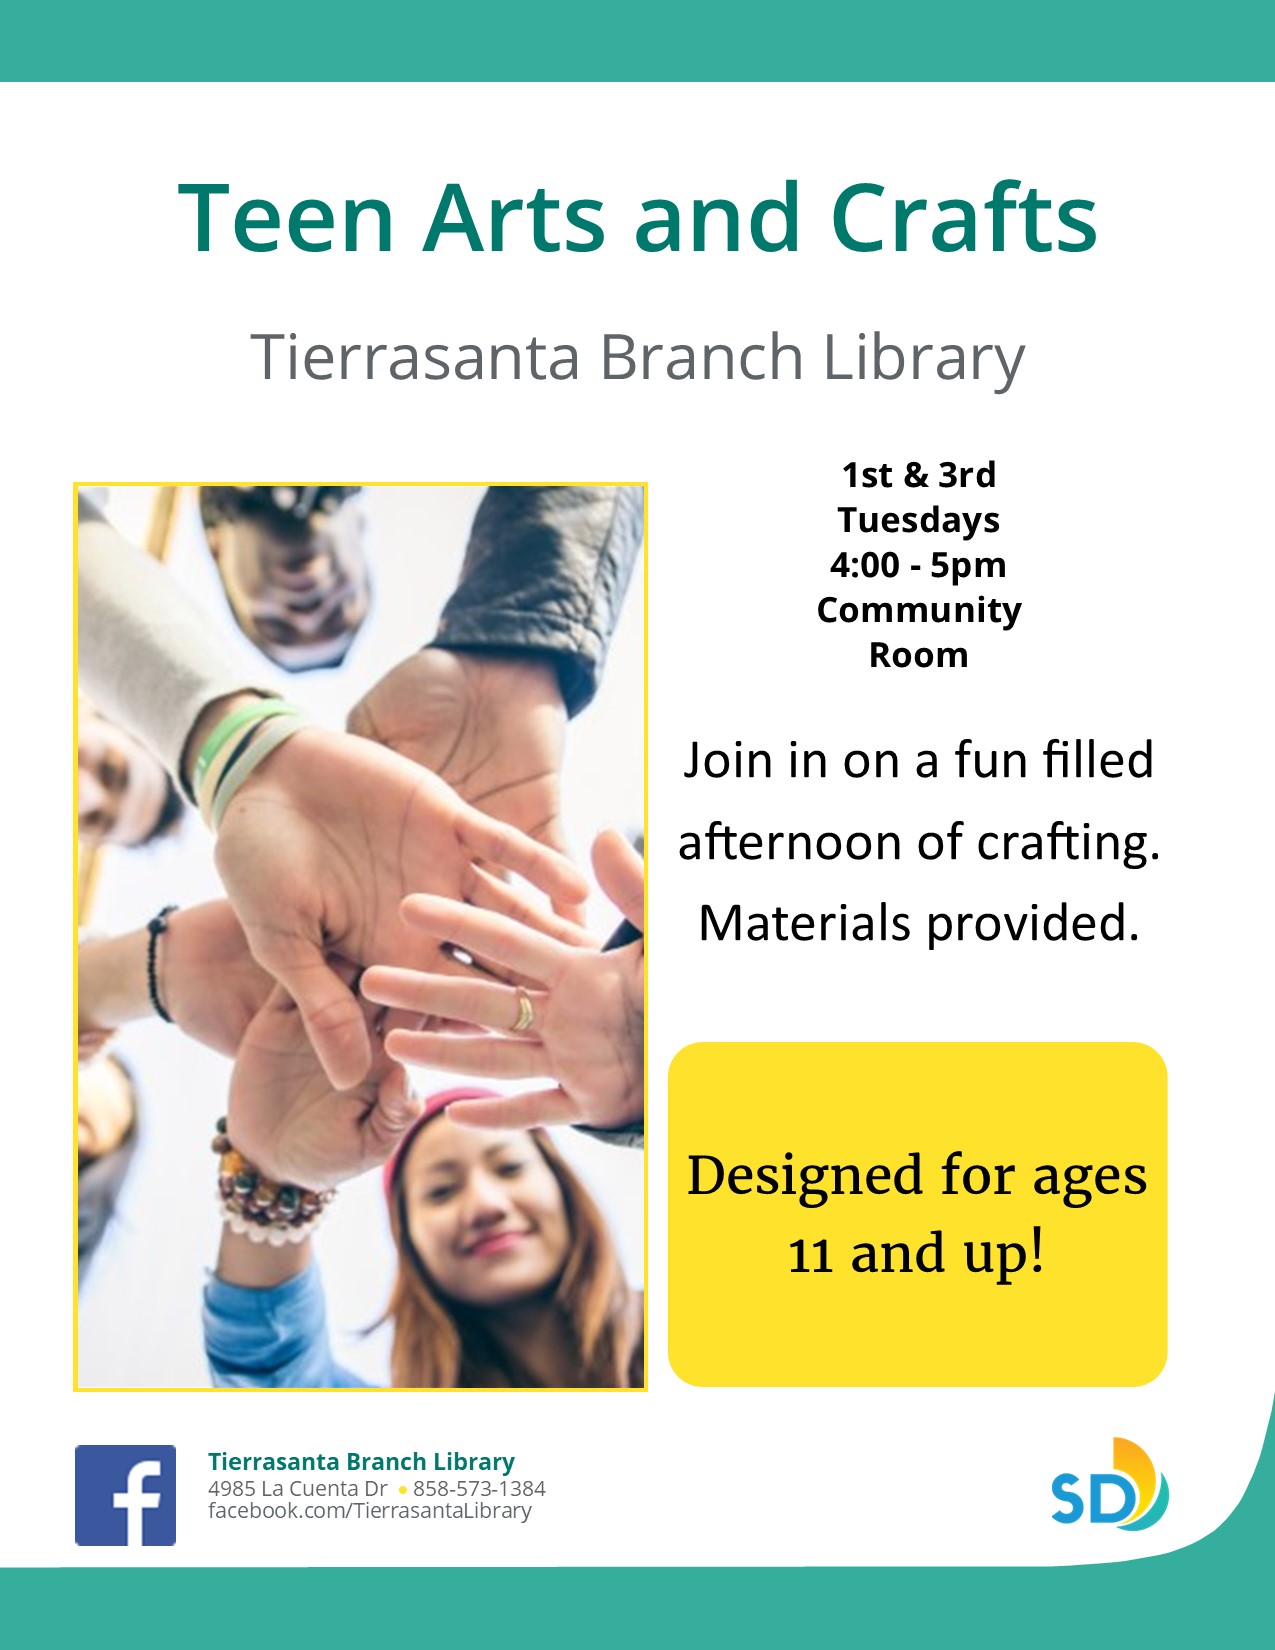 Flyer with the image of teenagers in a circle with their hands together